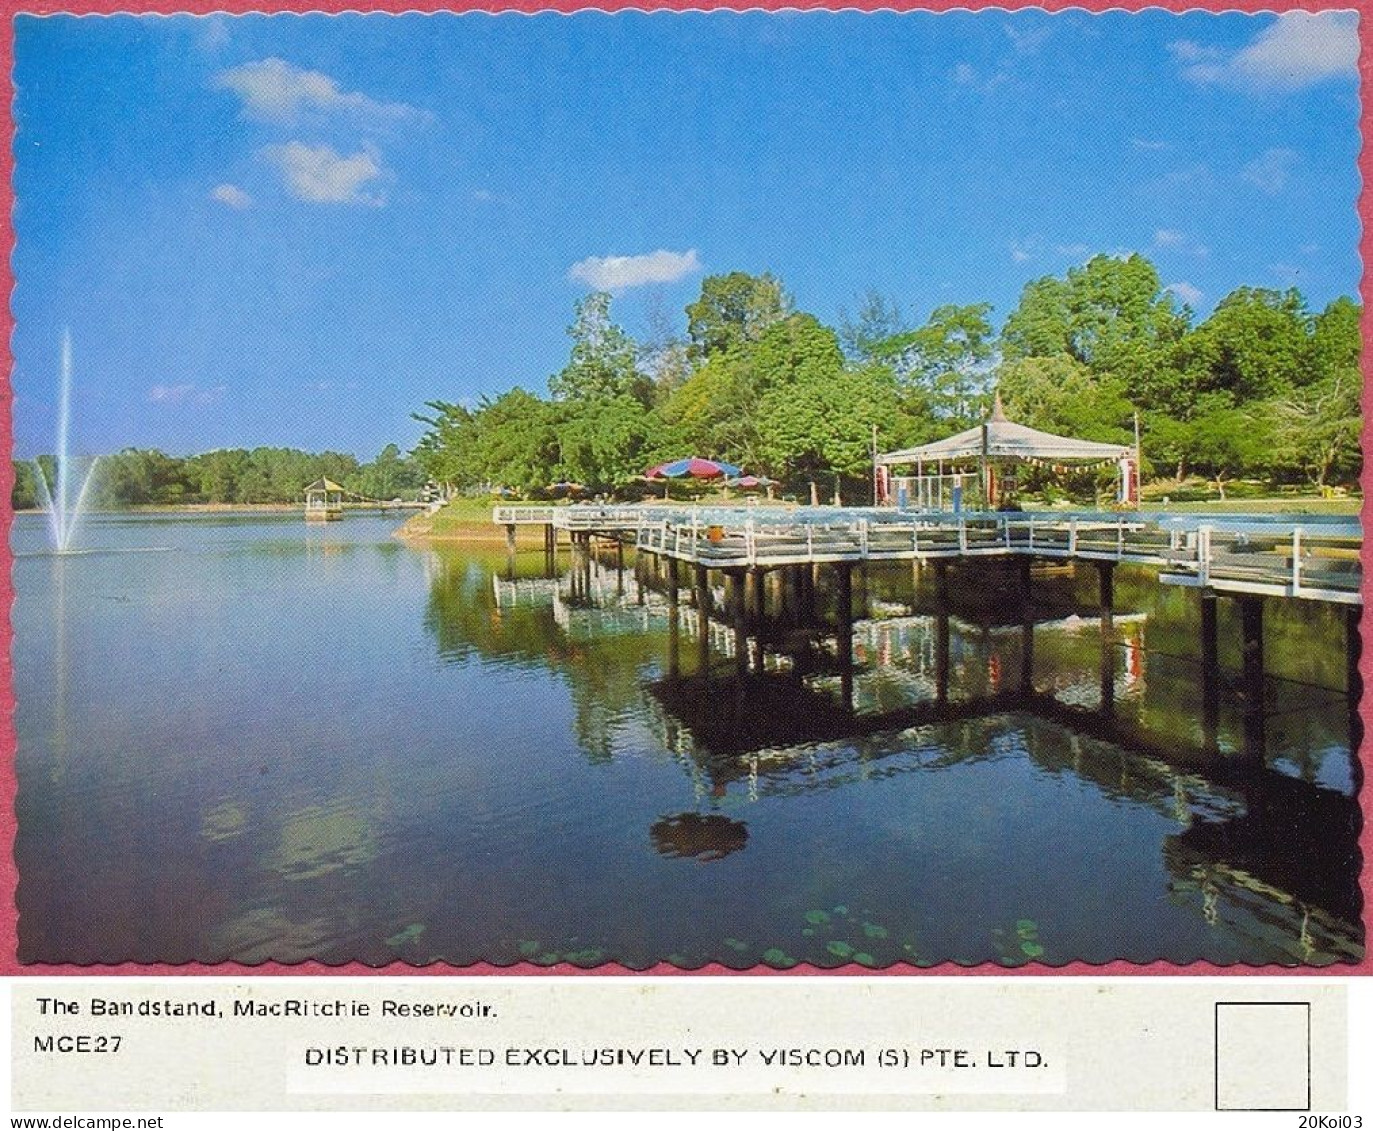 Singapore The Bandstand, MacRitchie Reservoir, 1978's MCE27 DISTRIBUTED EXCLUSIVELY BY VISCOM (S) PTE. LTD._cpc - Singapur